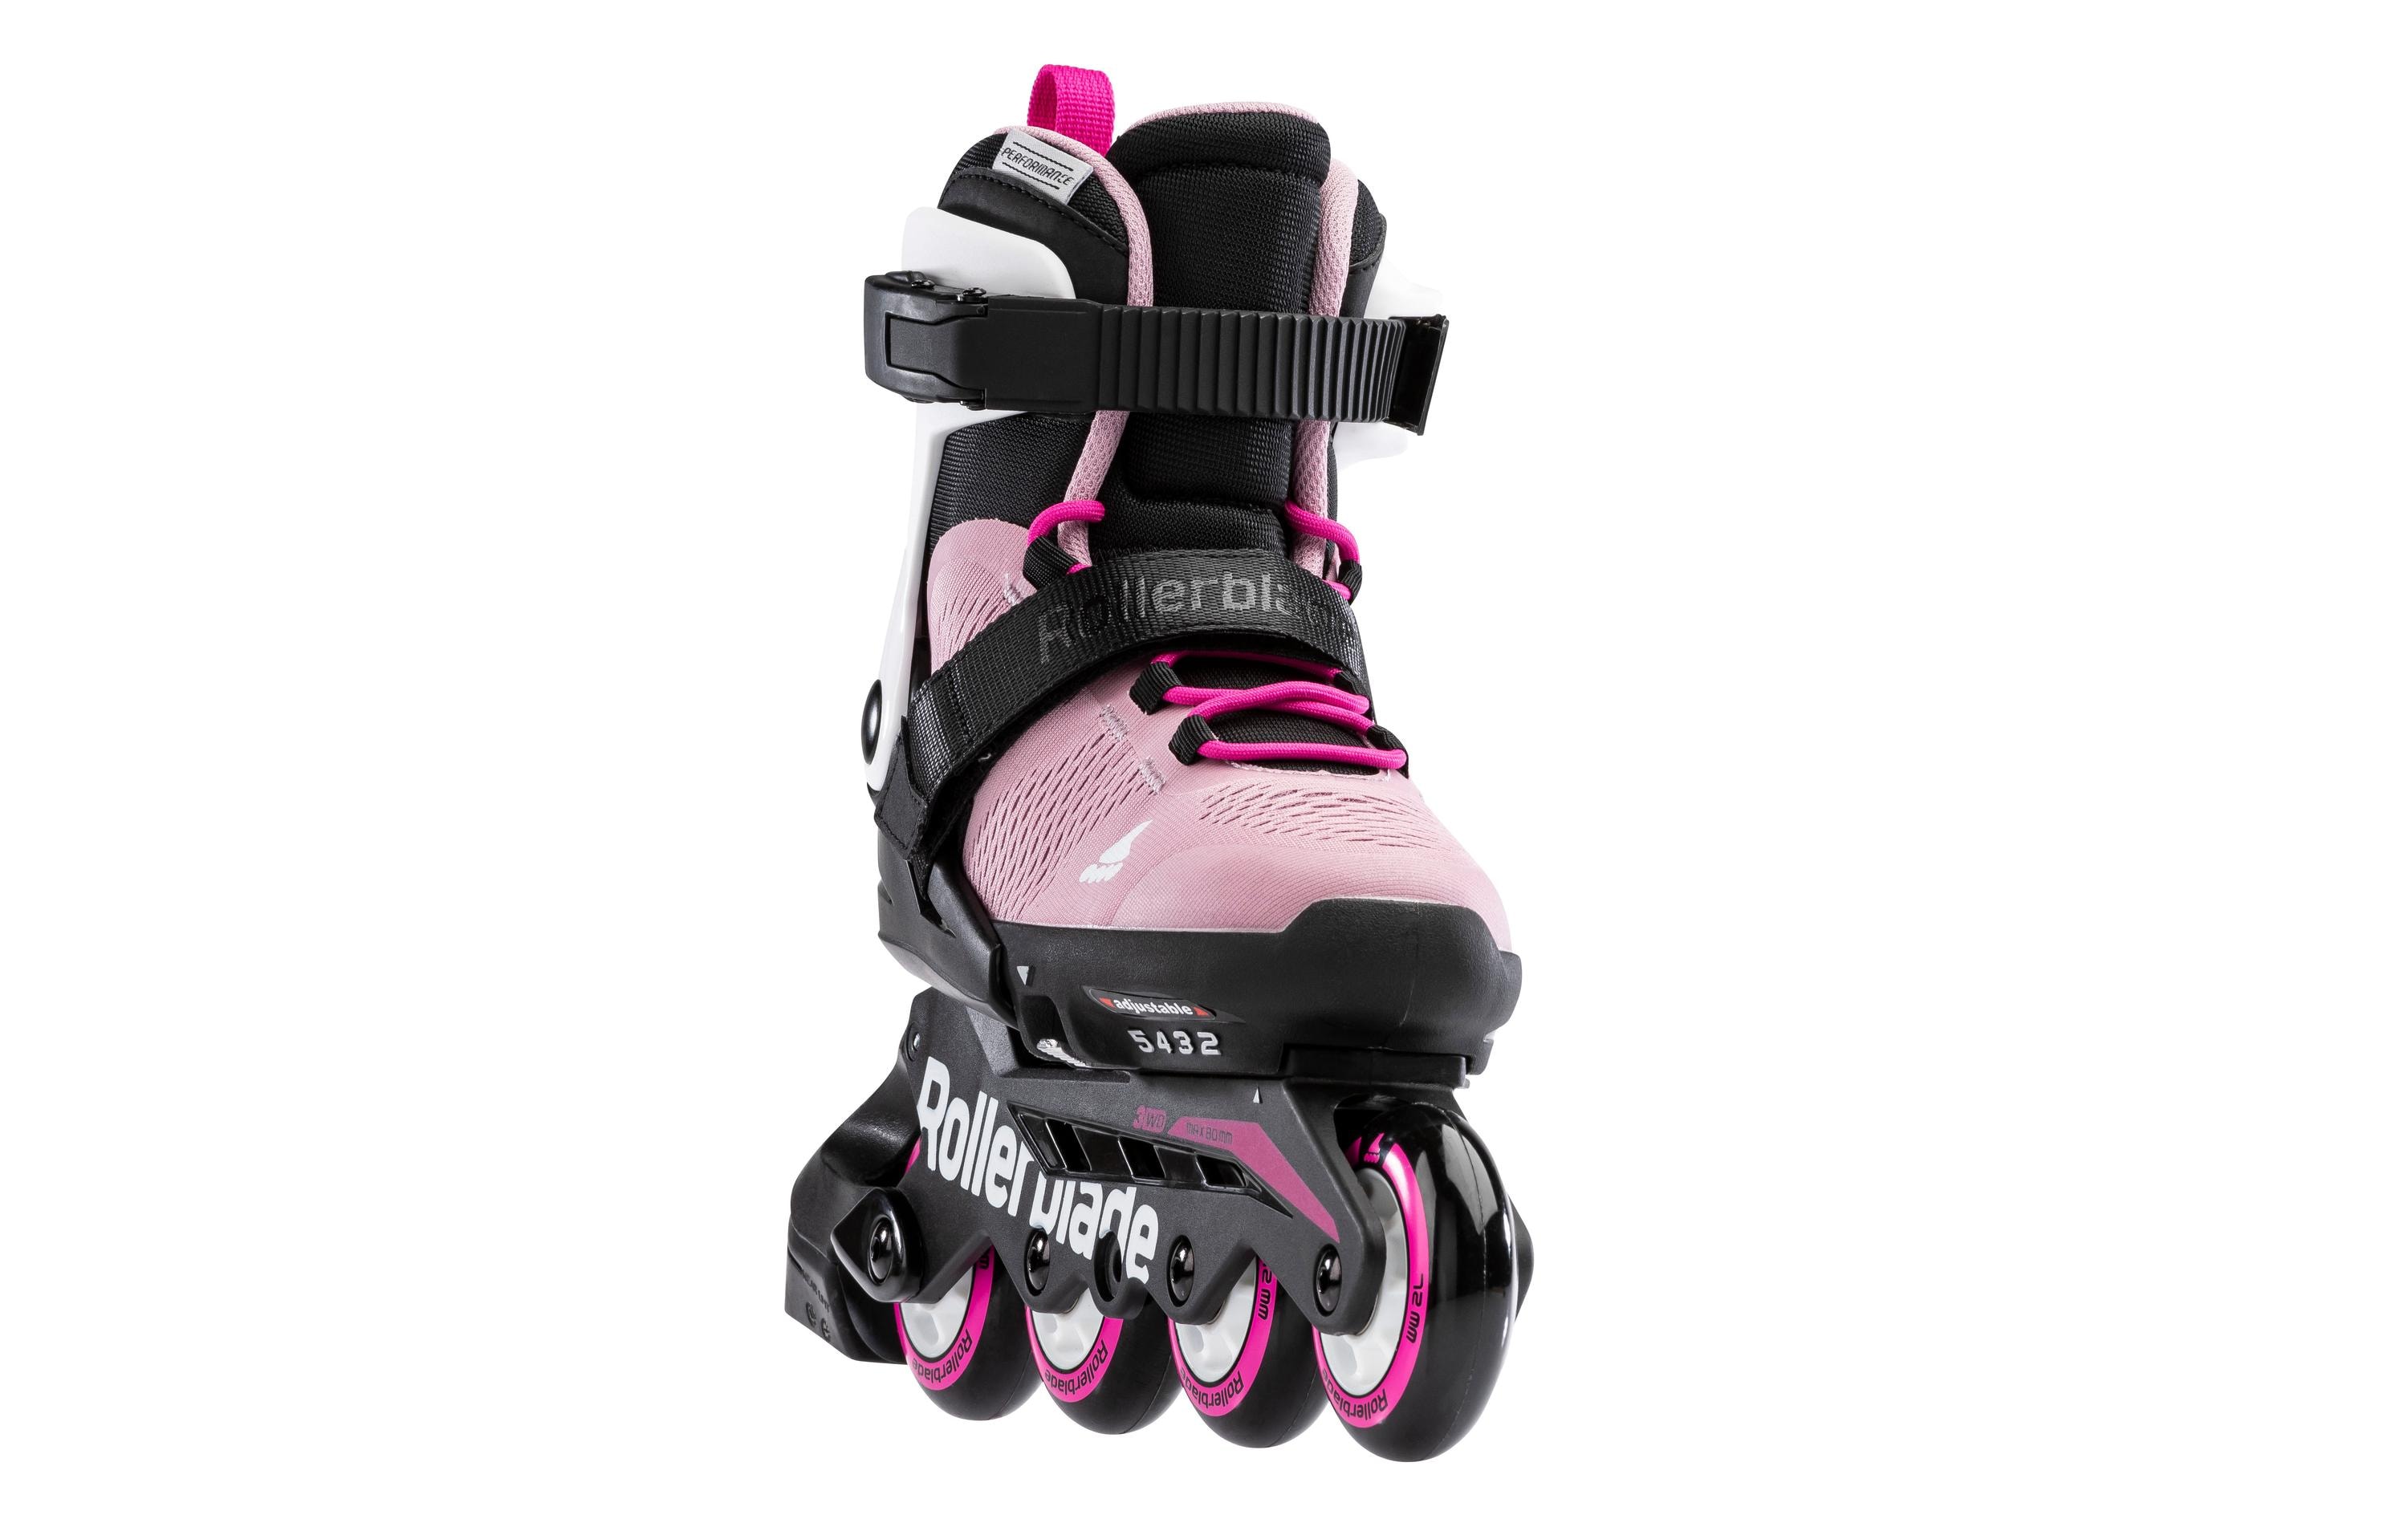 ROLLERBLADE Microblade Combo 210